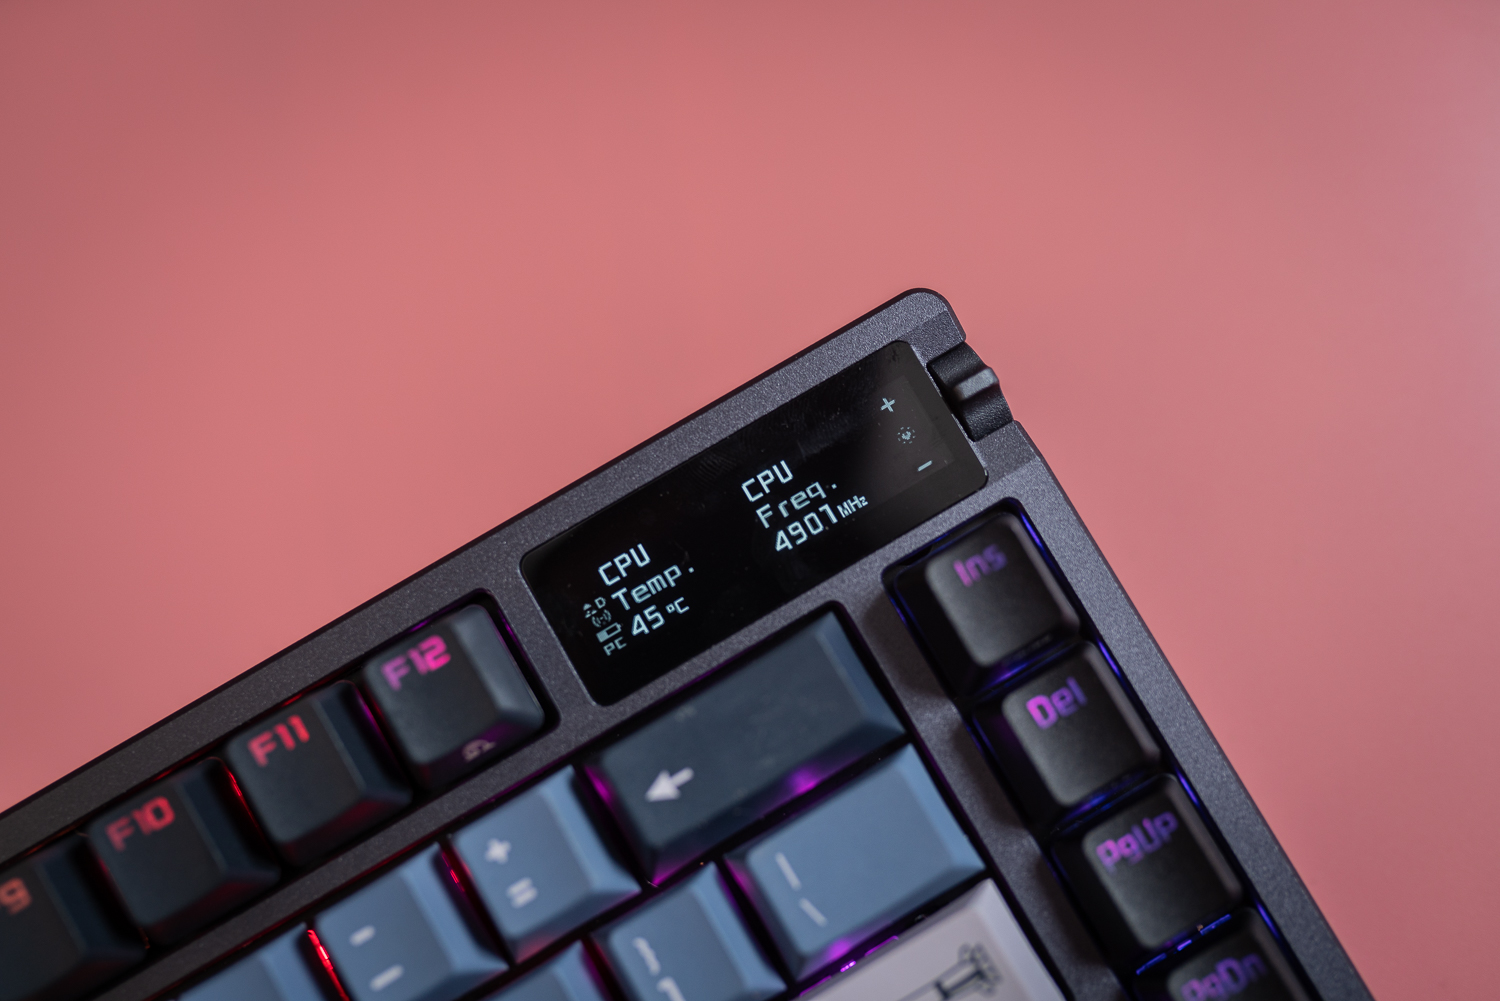 The ASUS ROG Azoth is a gaming and custom keyboard fused together